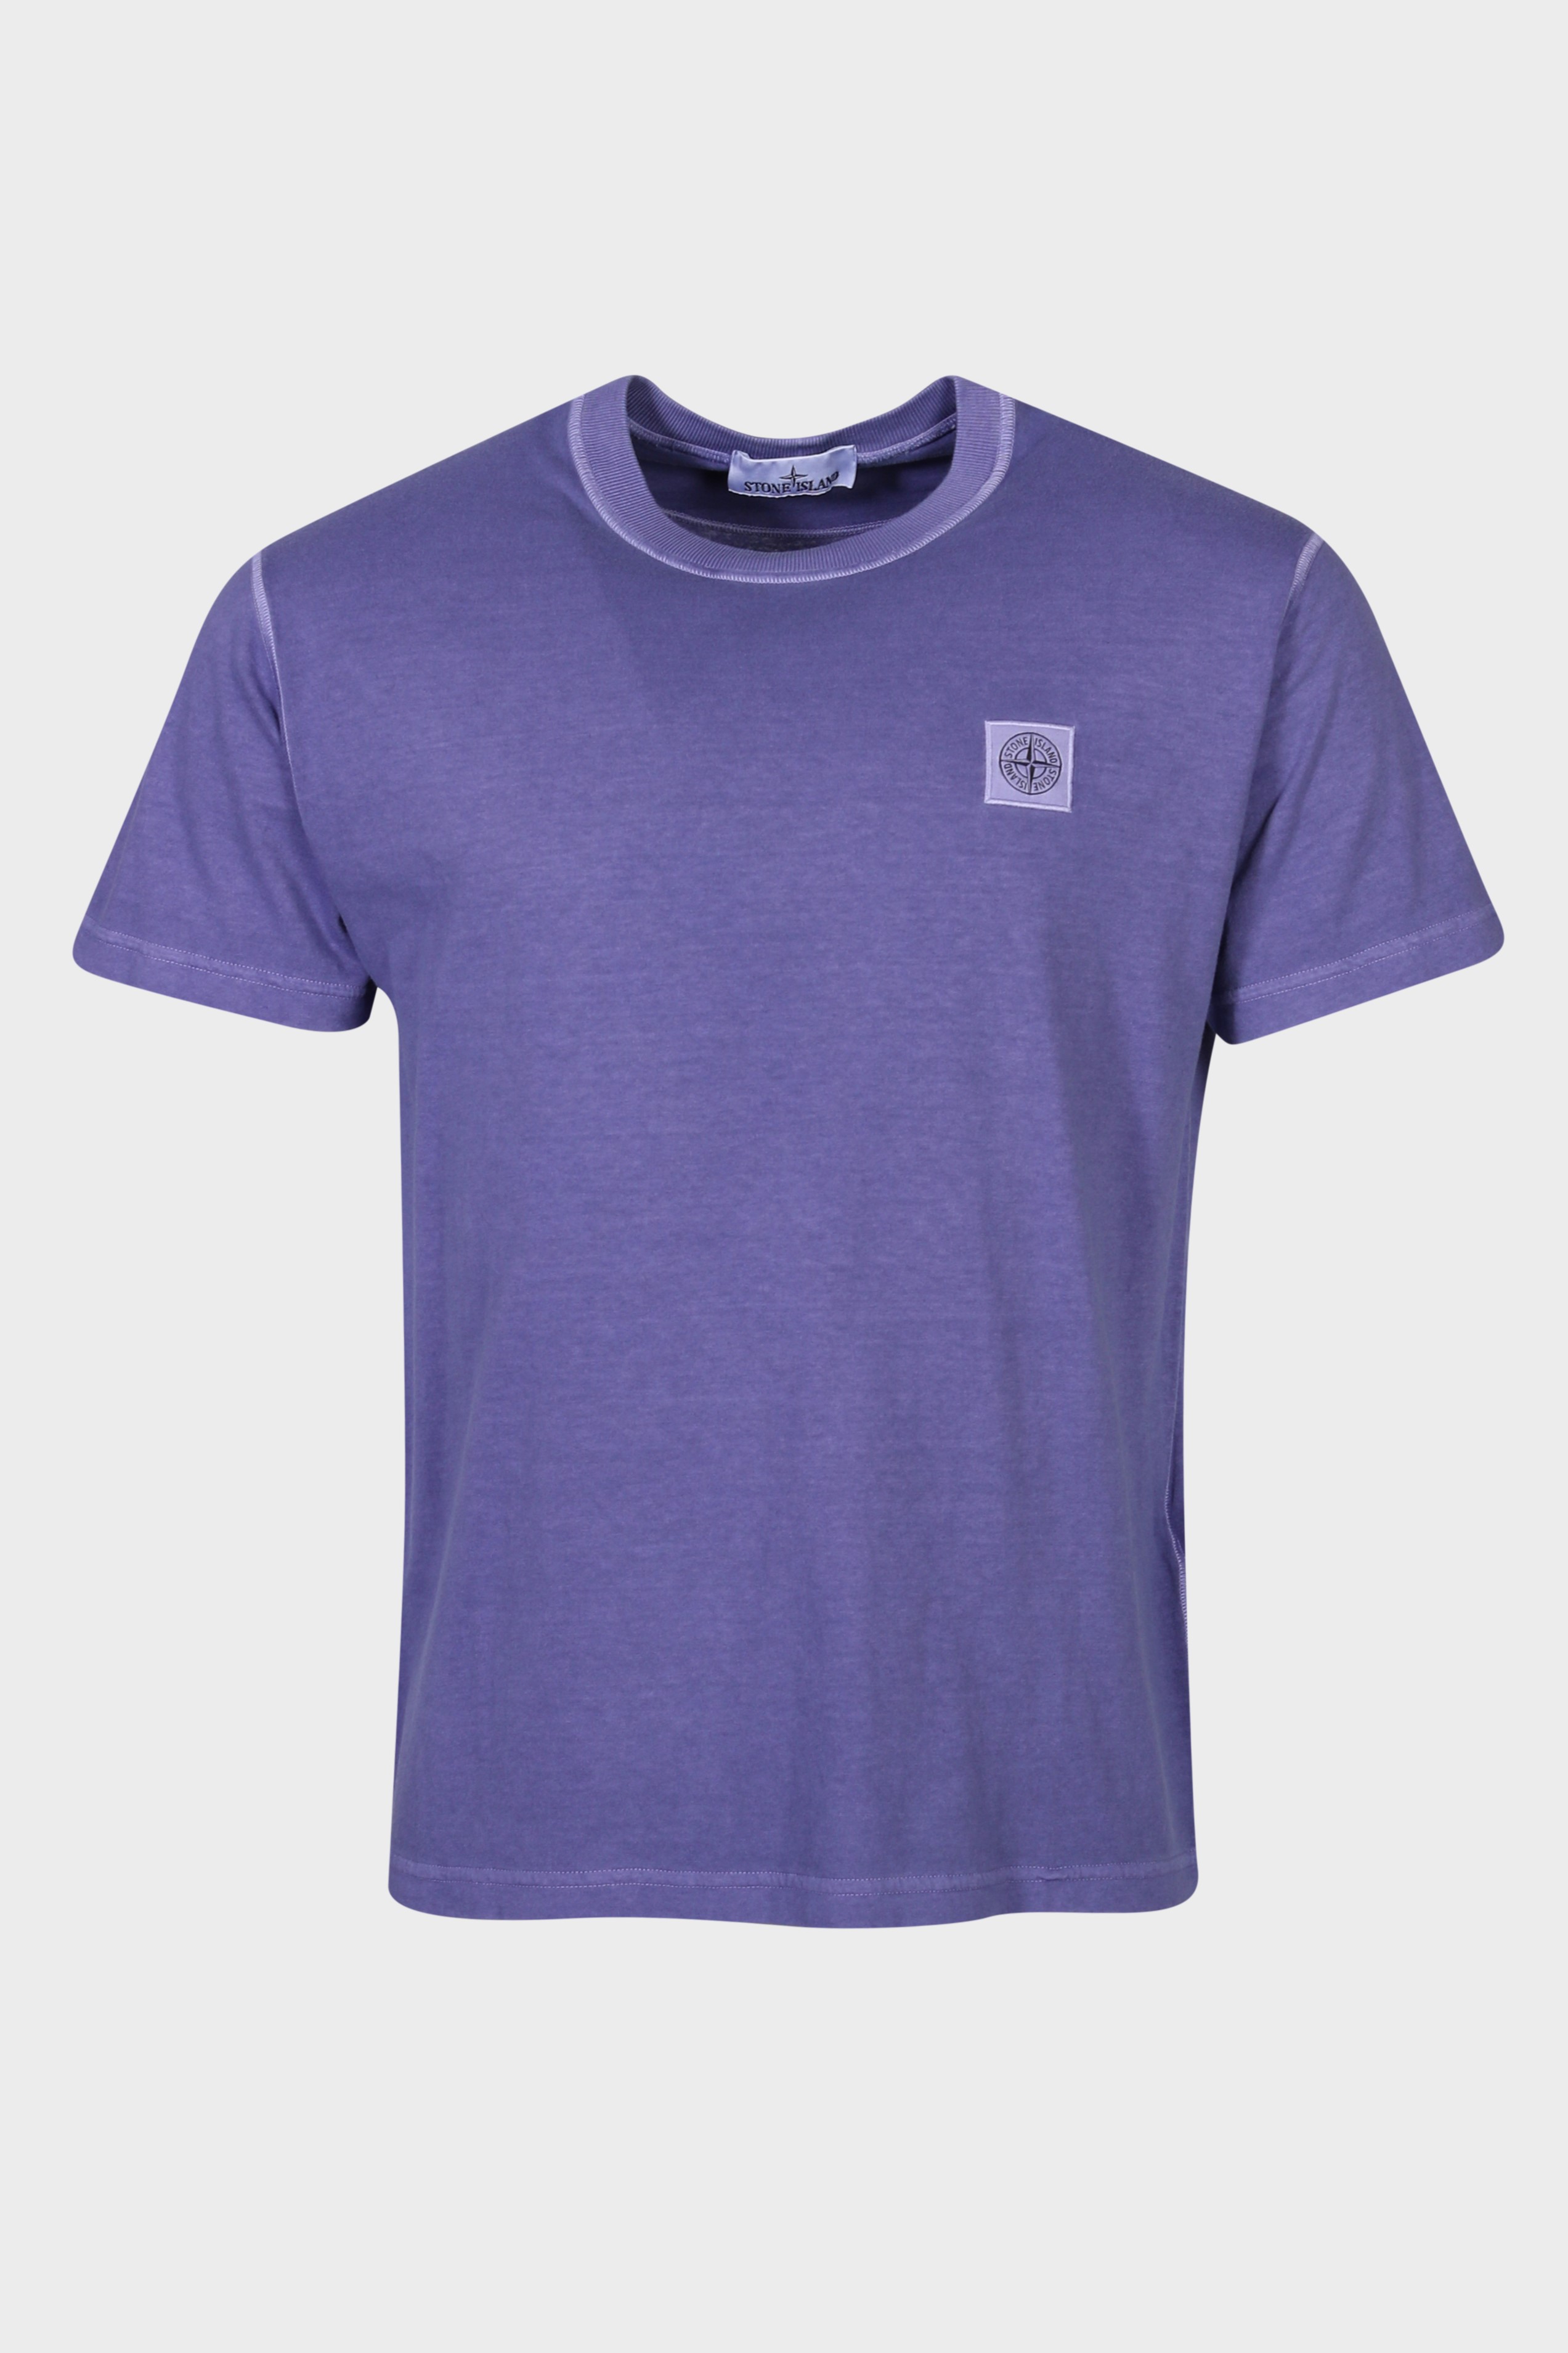 STONE ISLAND T-Shirt in Washed Lilac